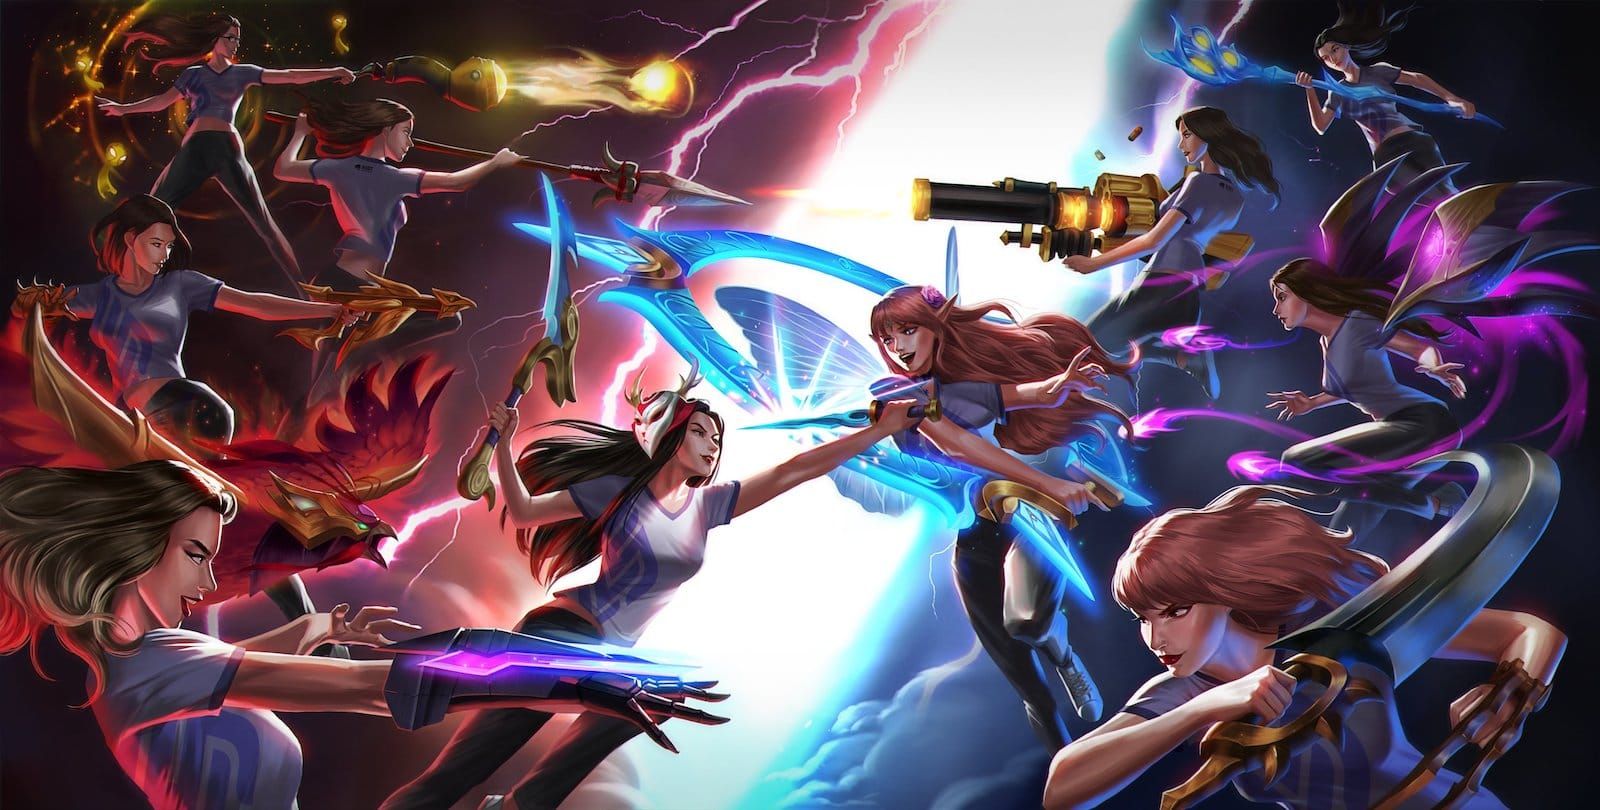 stylized image of female champions from league of legends champions fighting each other with one group on the left and one of the right